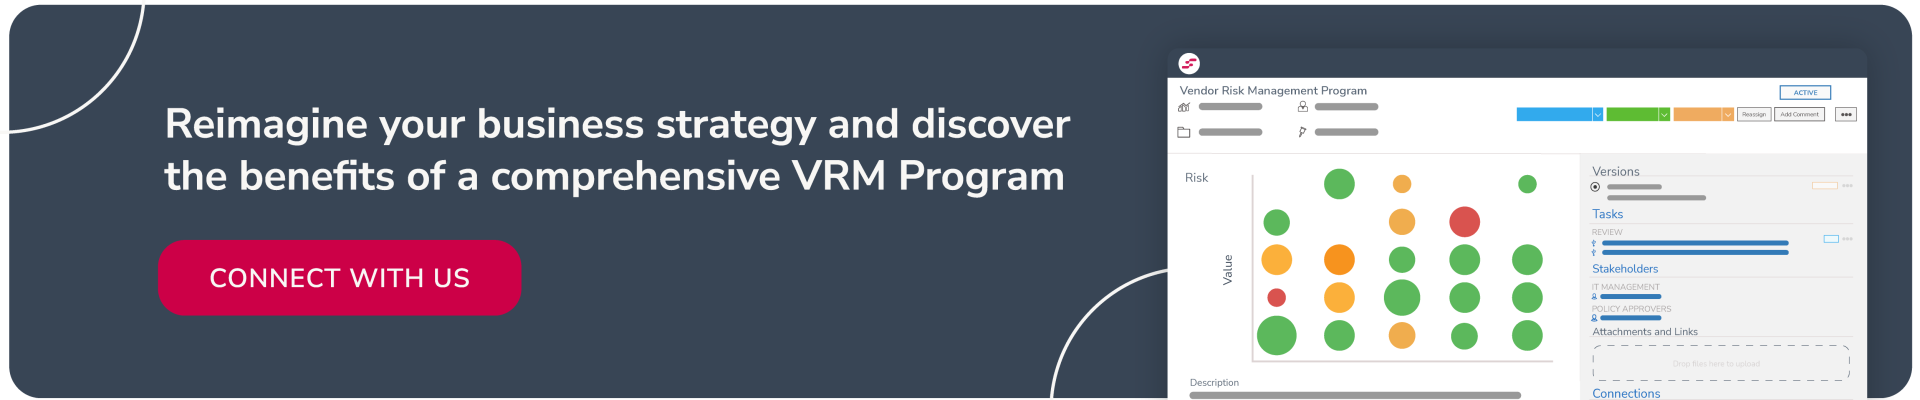 Reimagine your business strategy and discover the benefits of a comprehensive VRM Program